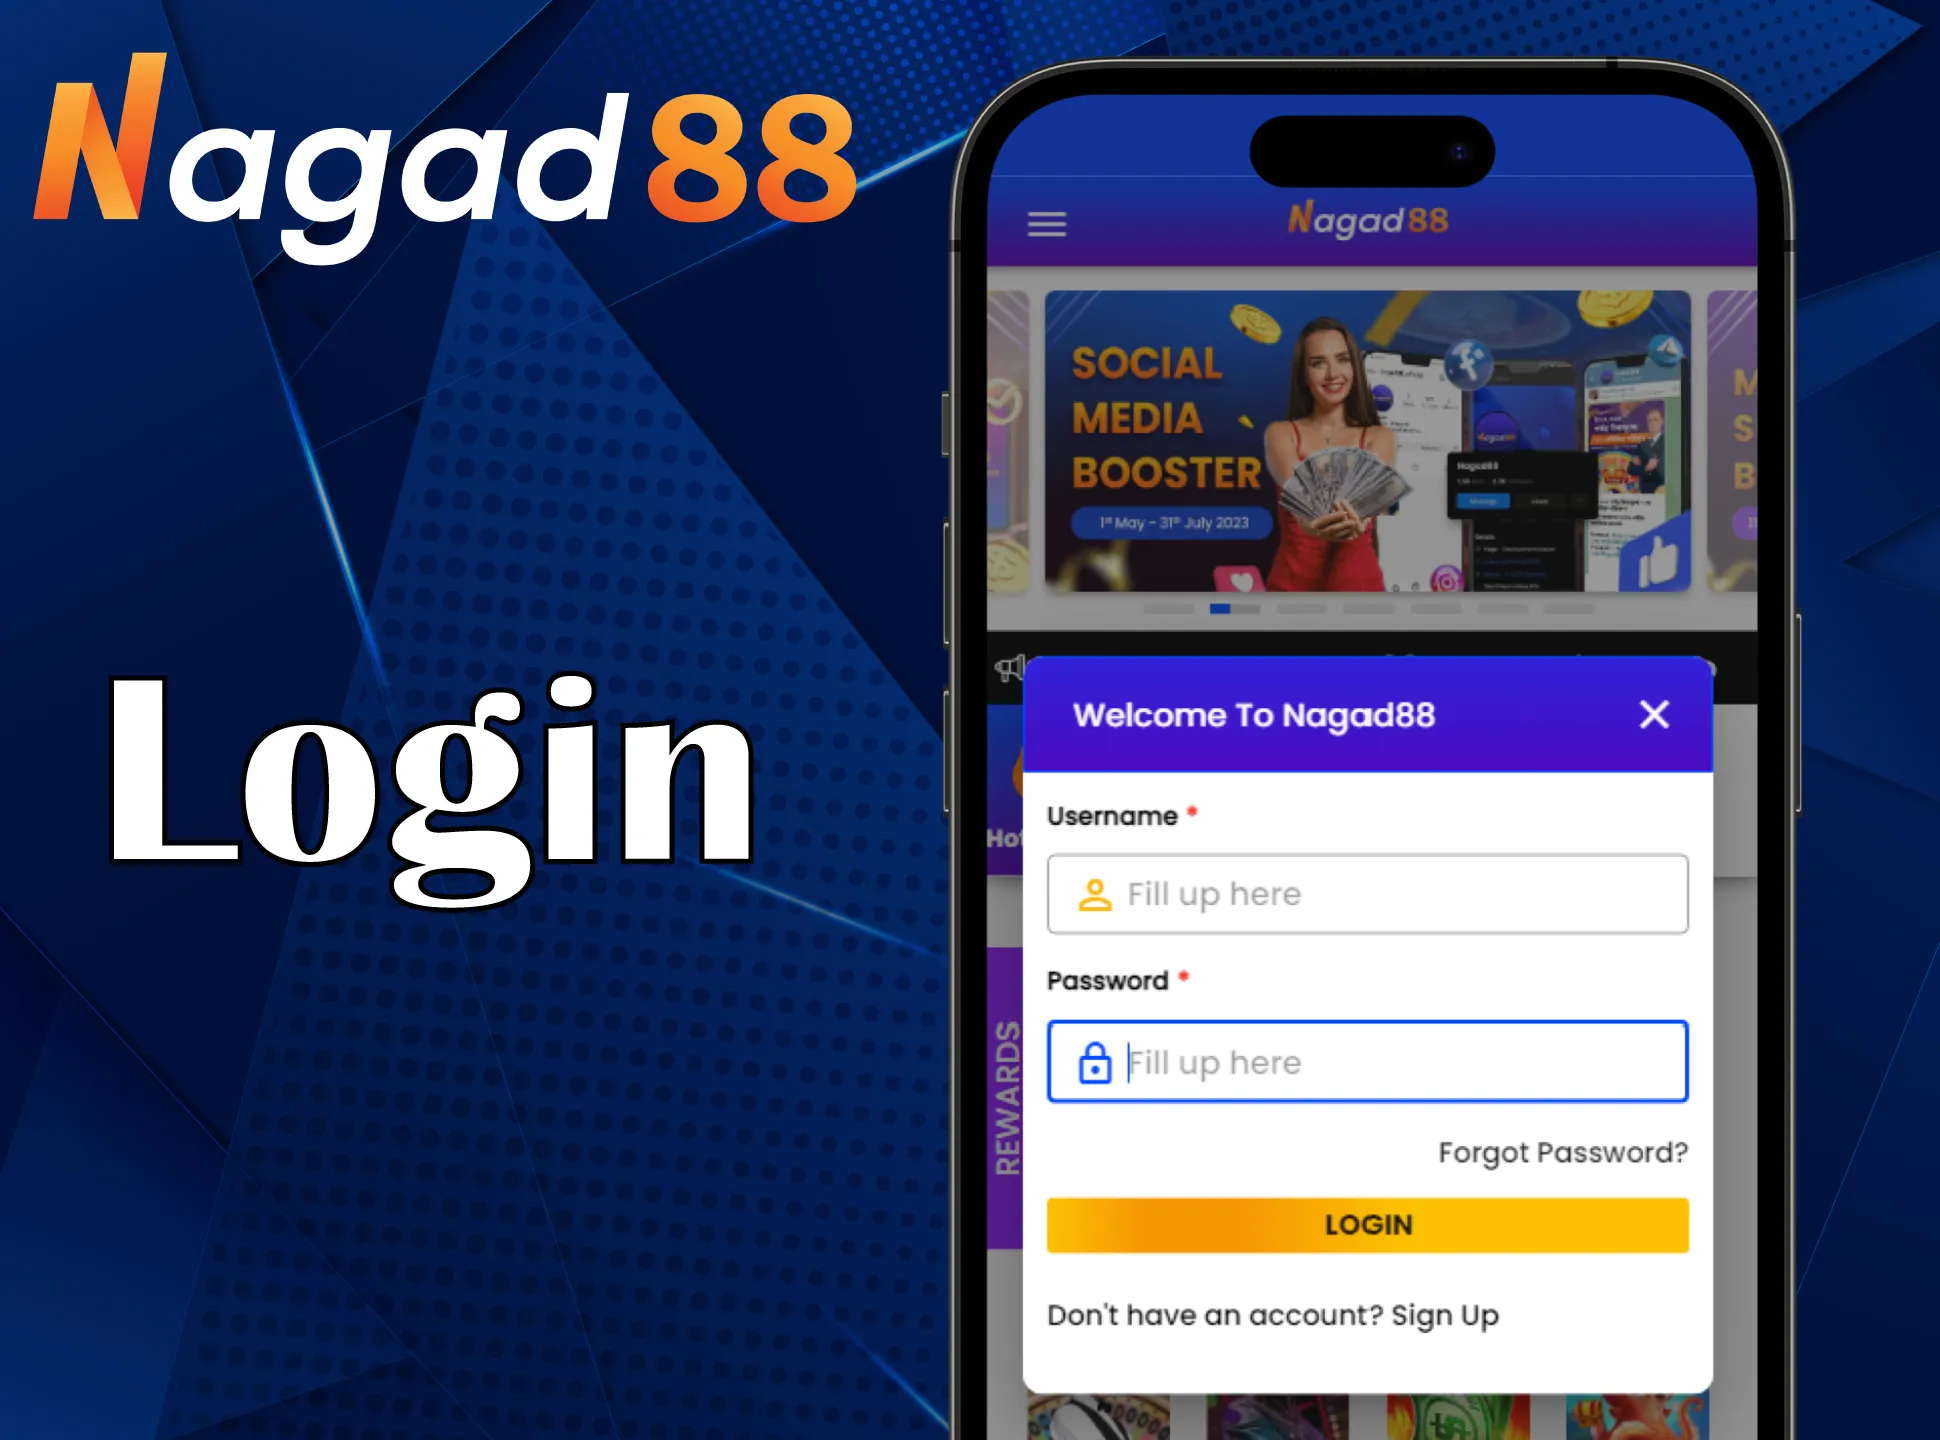 Log in to your Nagad88 app account.